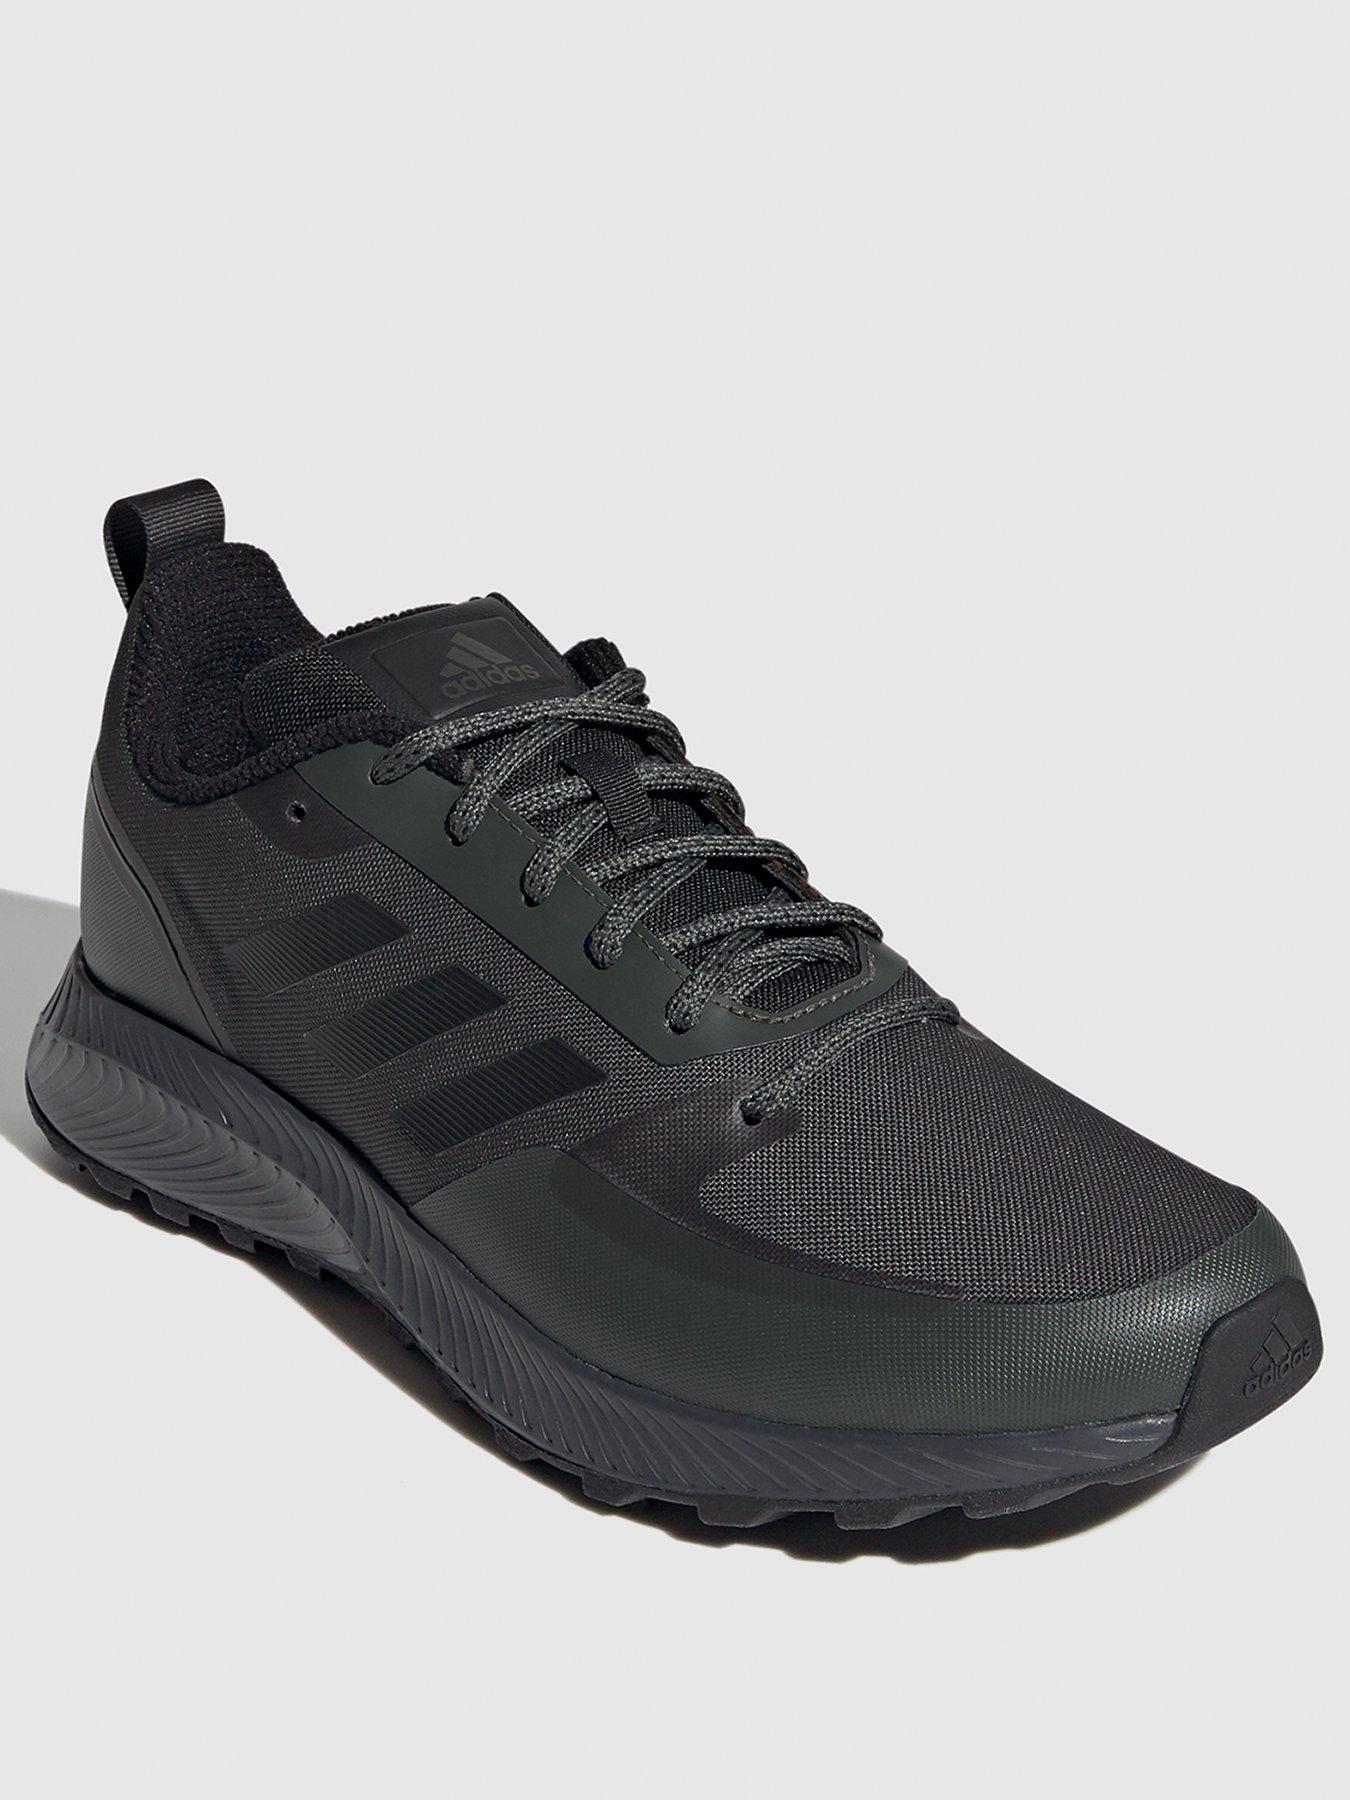 mens adidas trainer boots